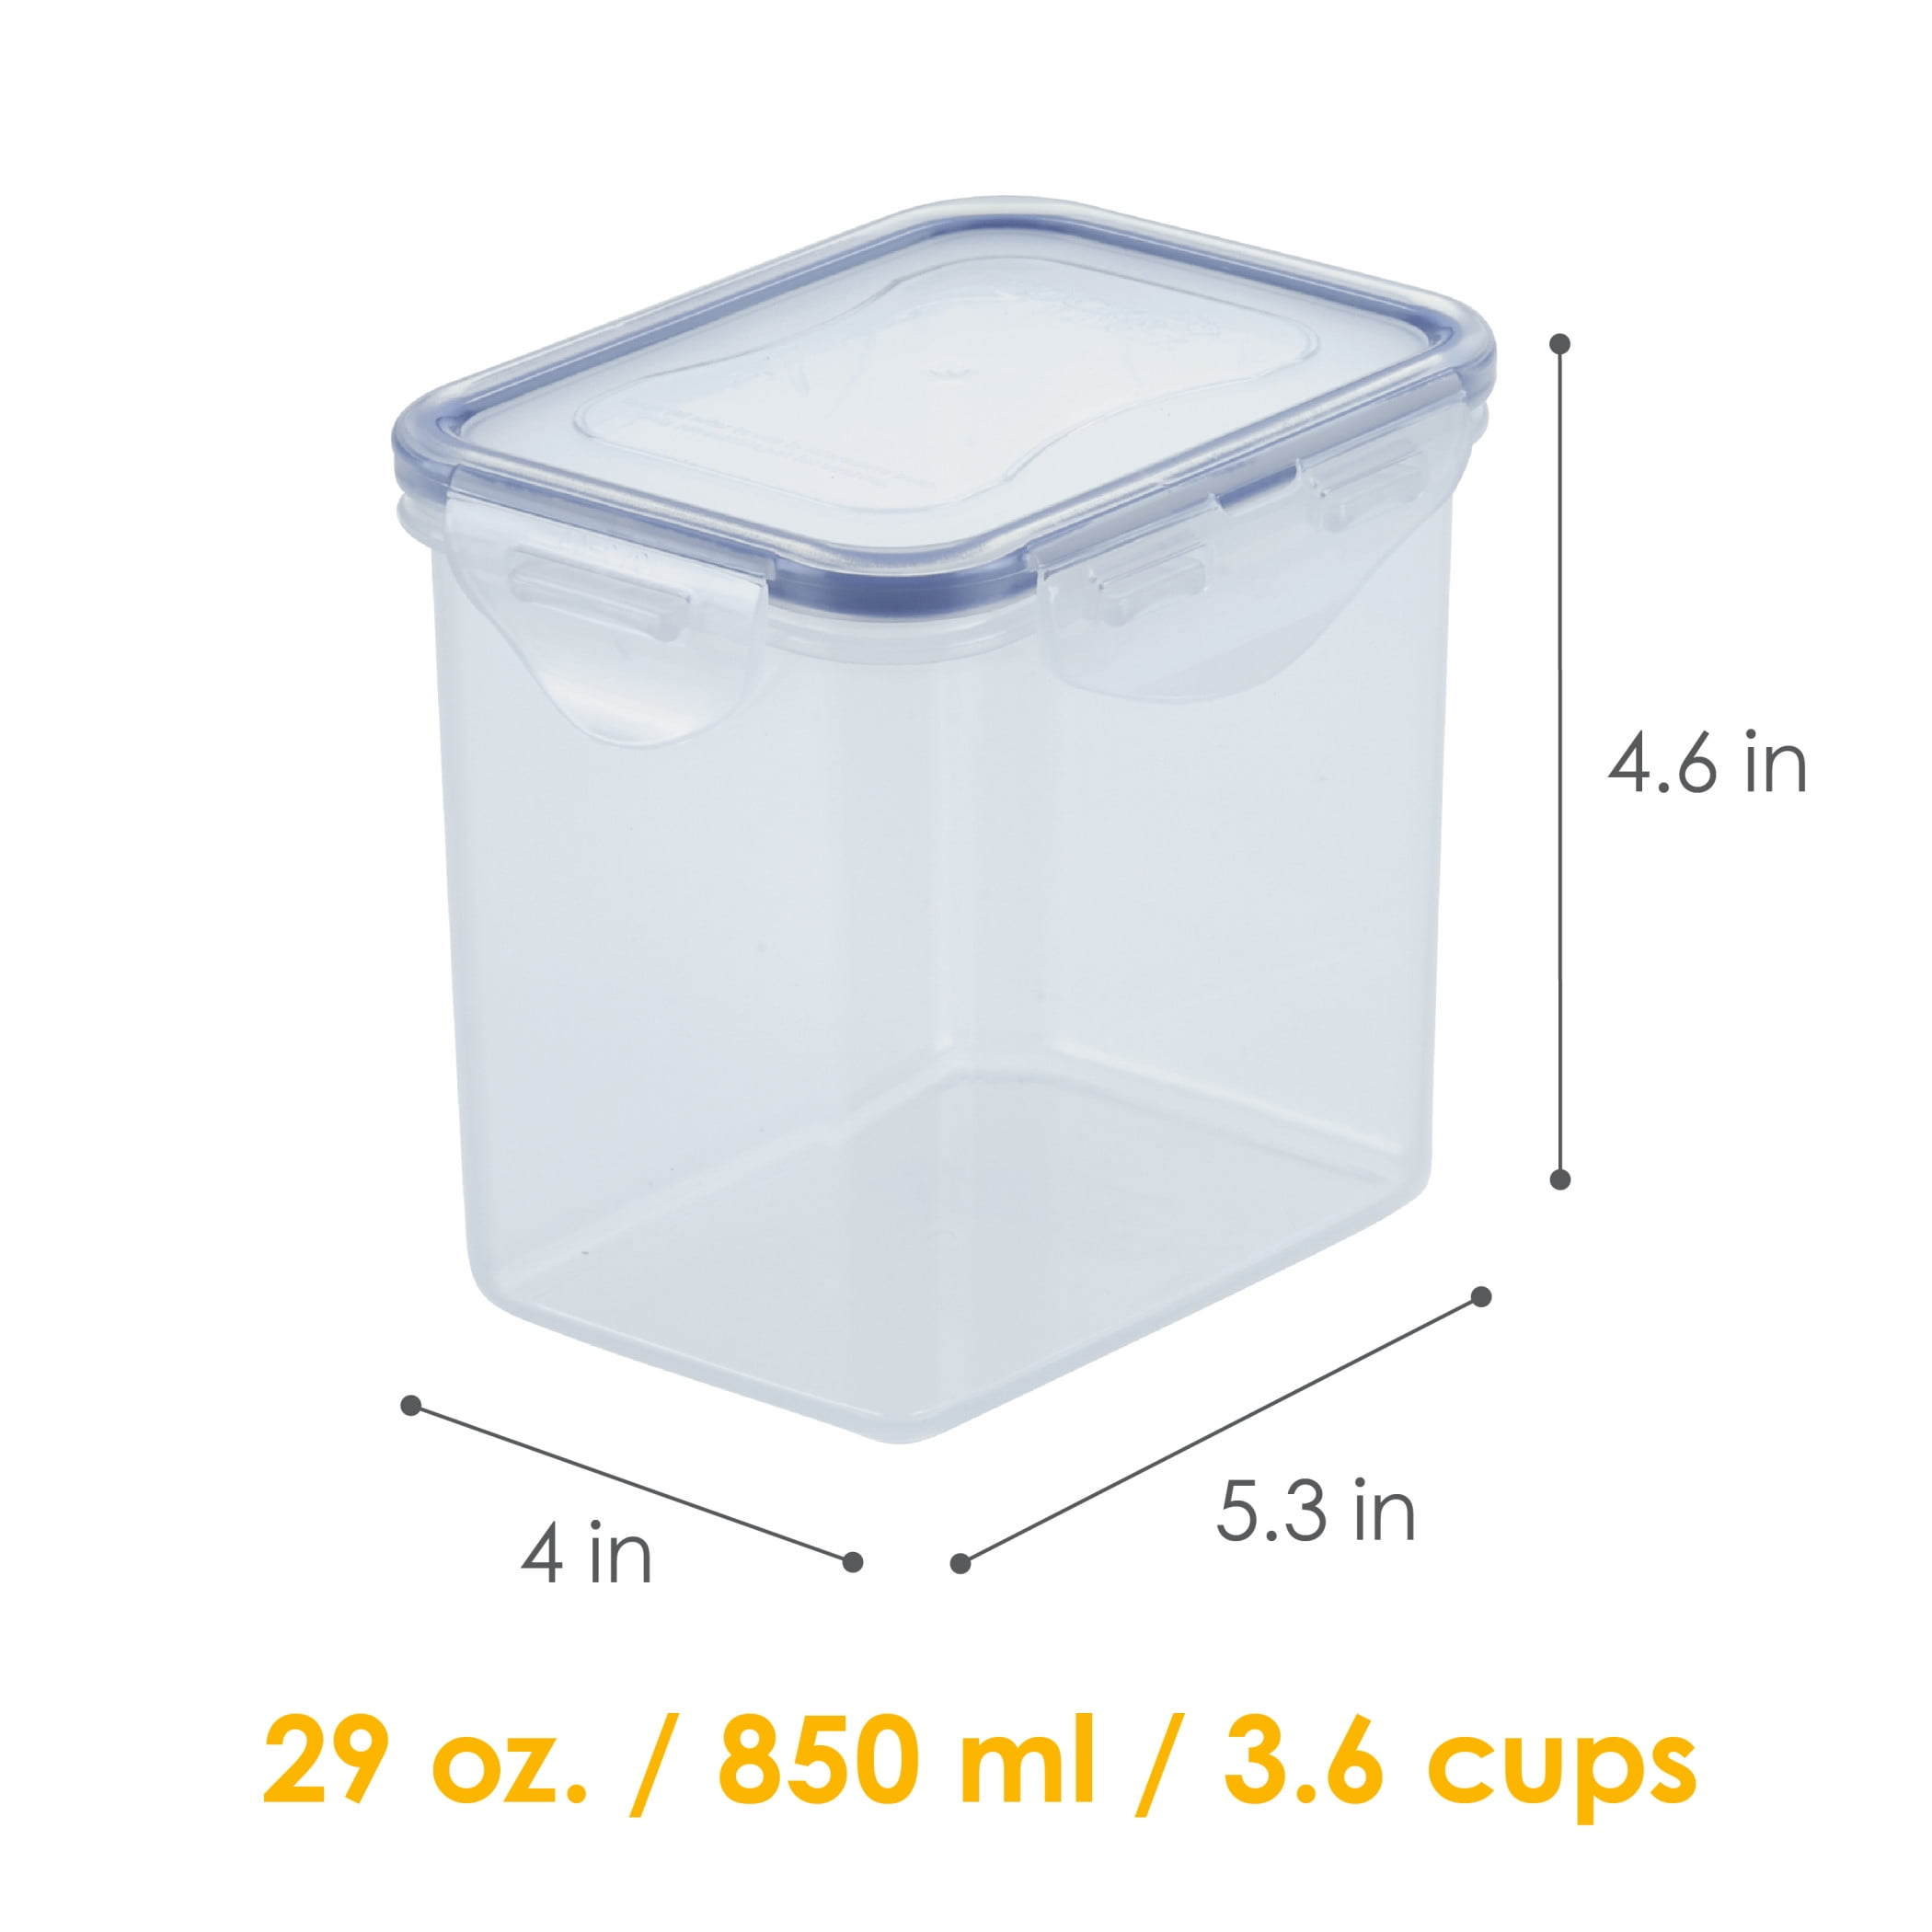 Food Storage Containers PANTRY, 900 ml (3.8 cups) – Gourmet